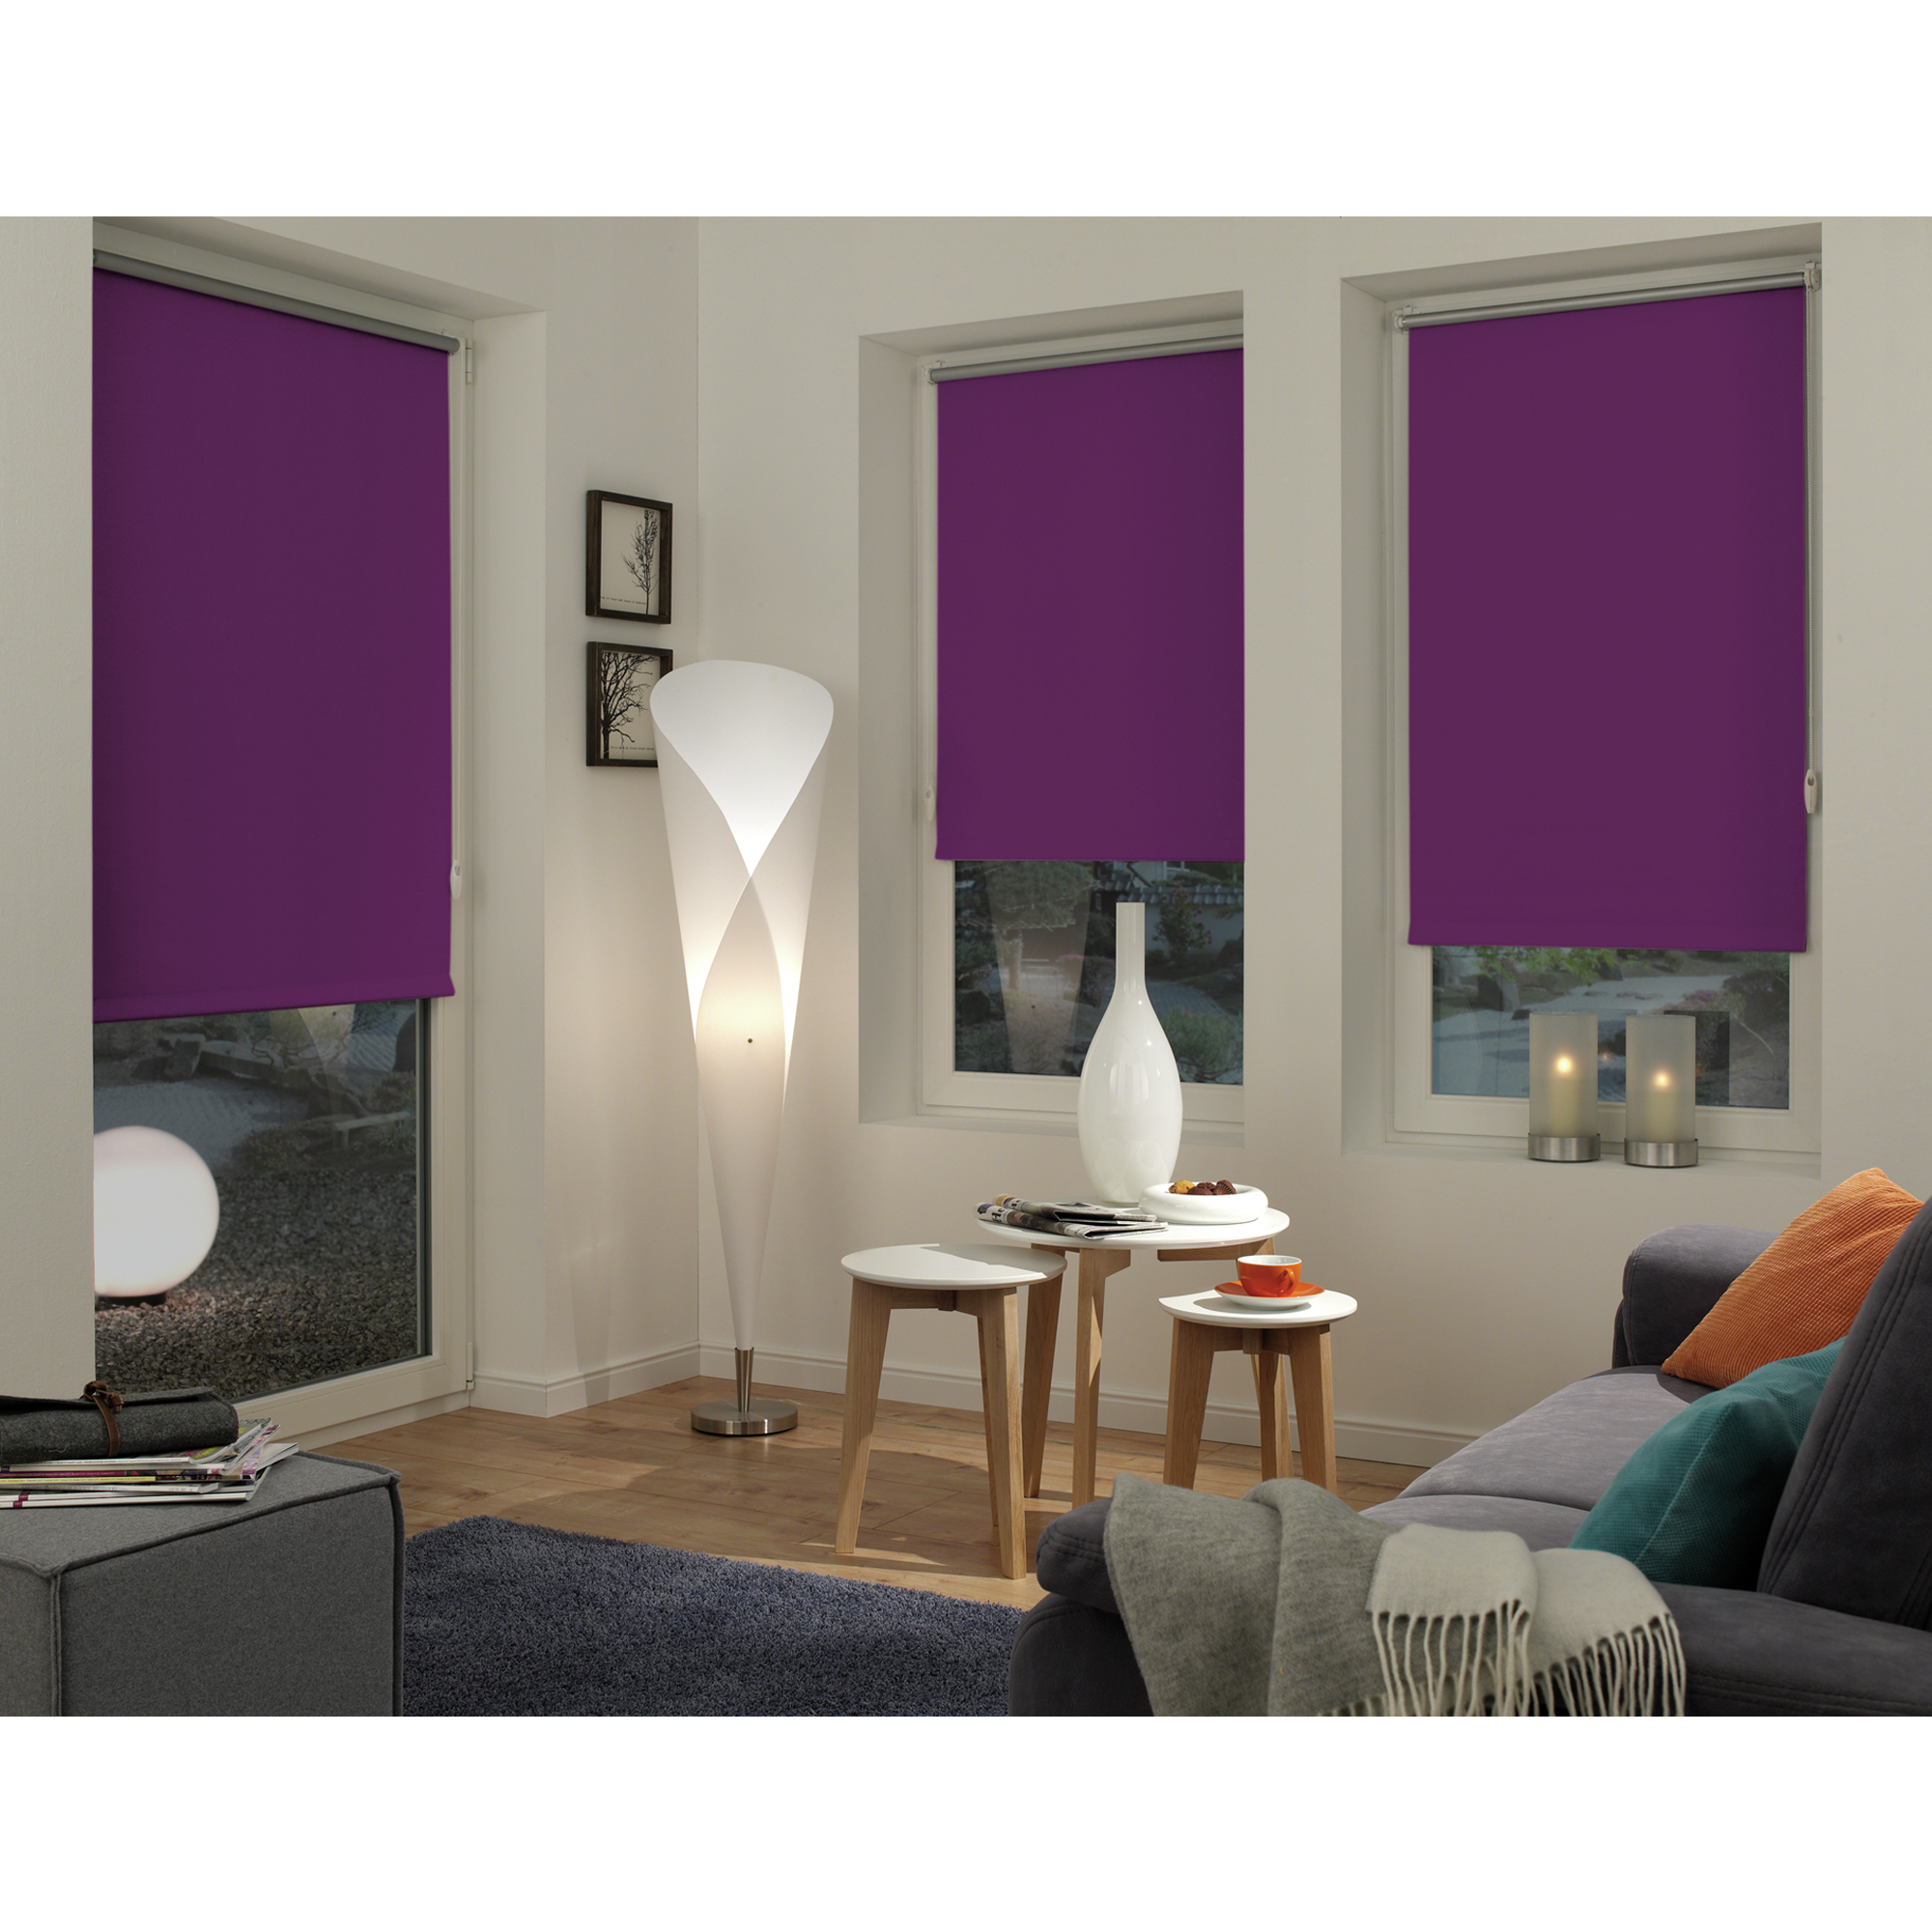 EasyFix Rollo 'Thermo energiesparend' lila 100 x 150 cm + product picture